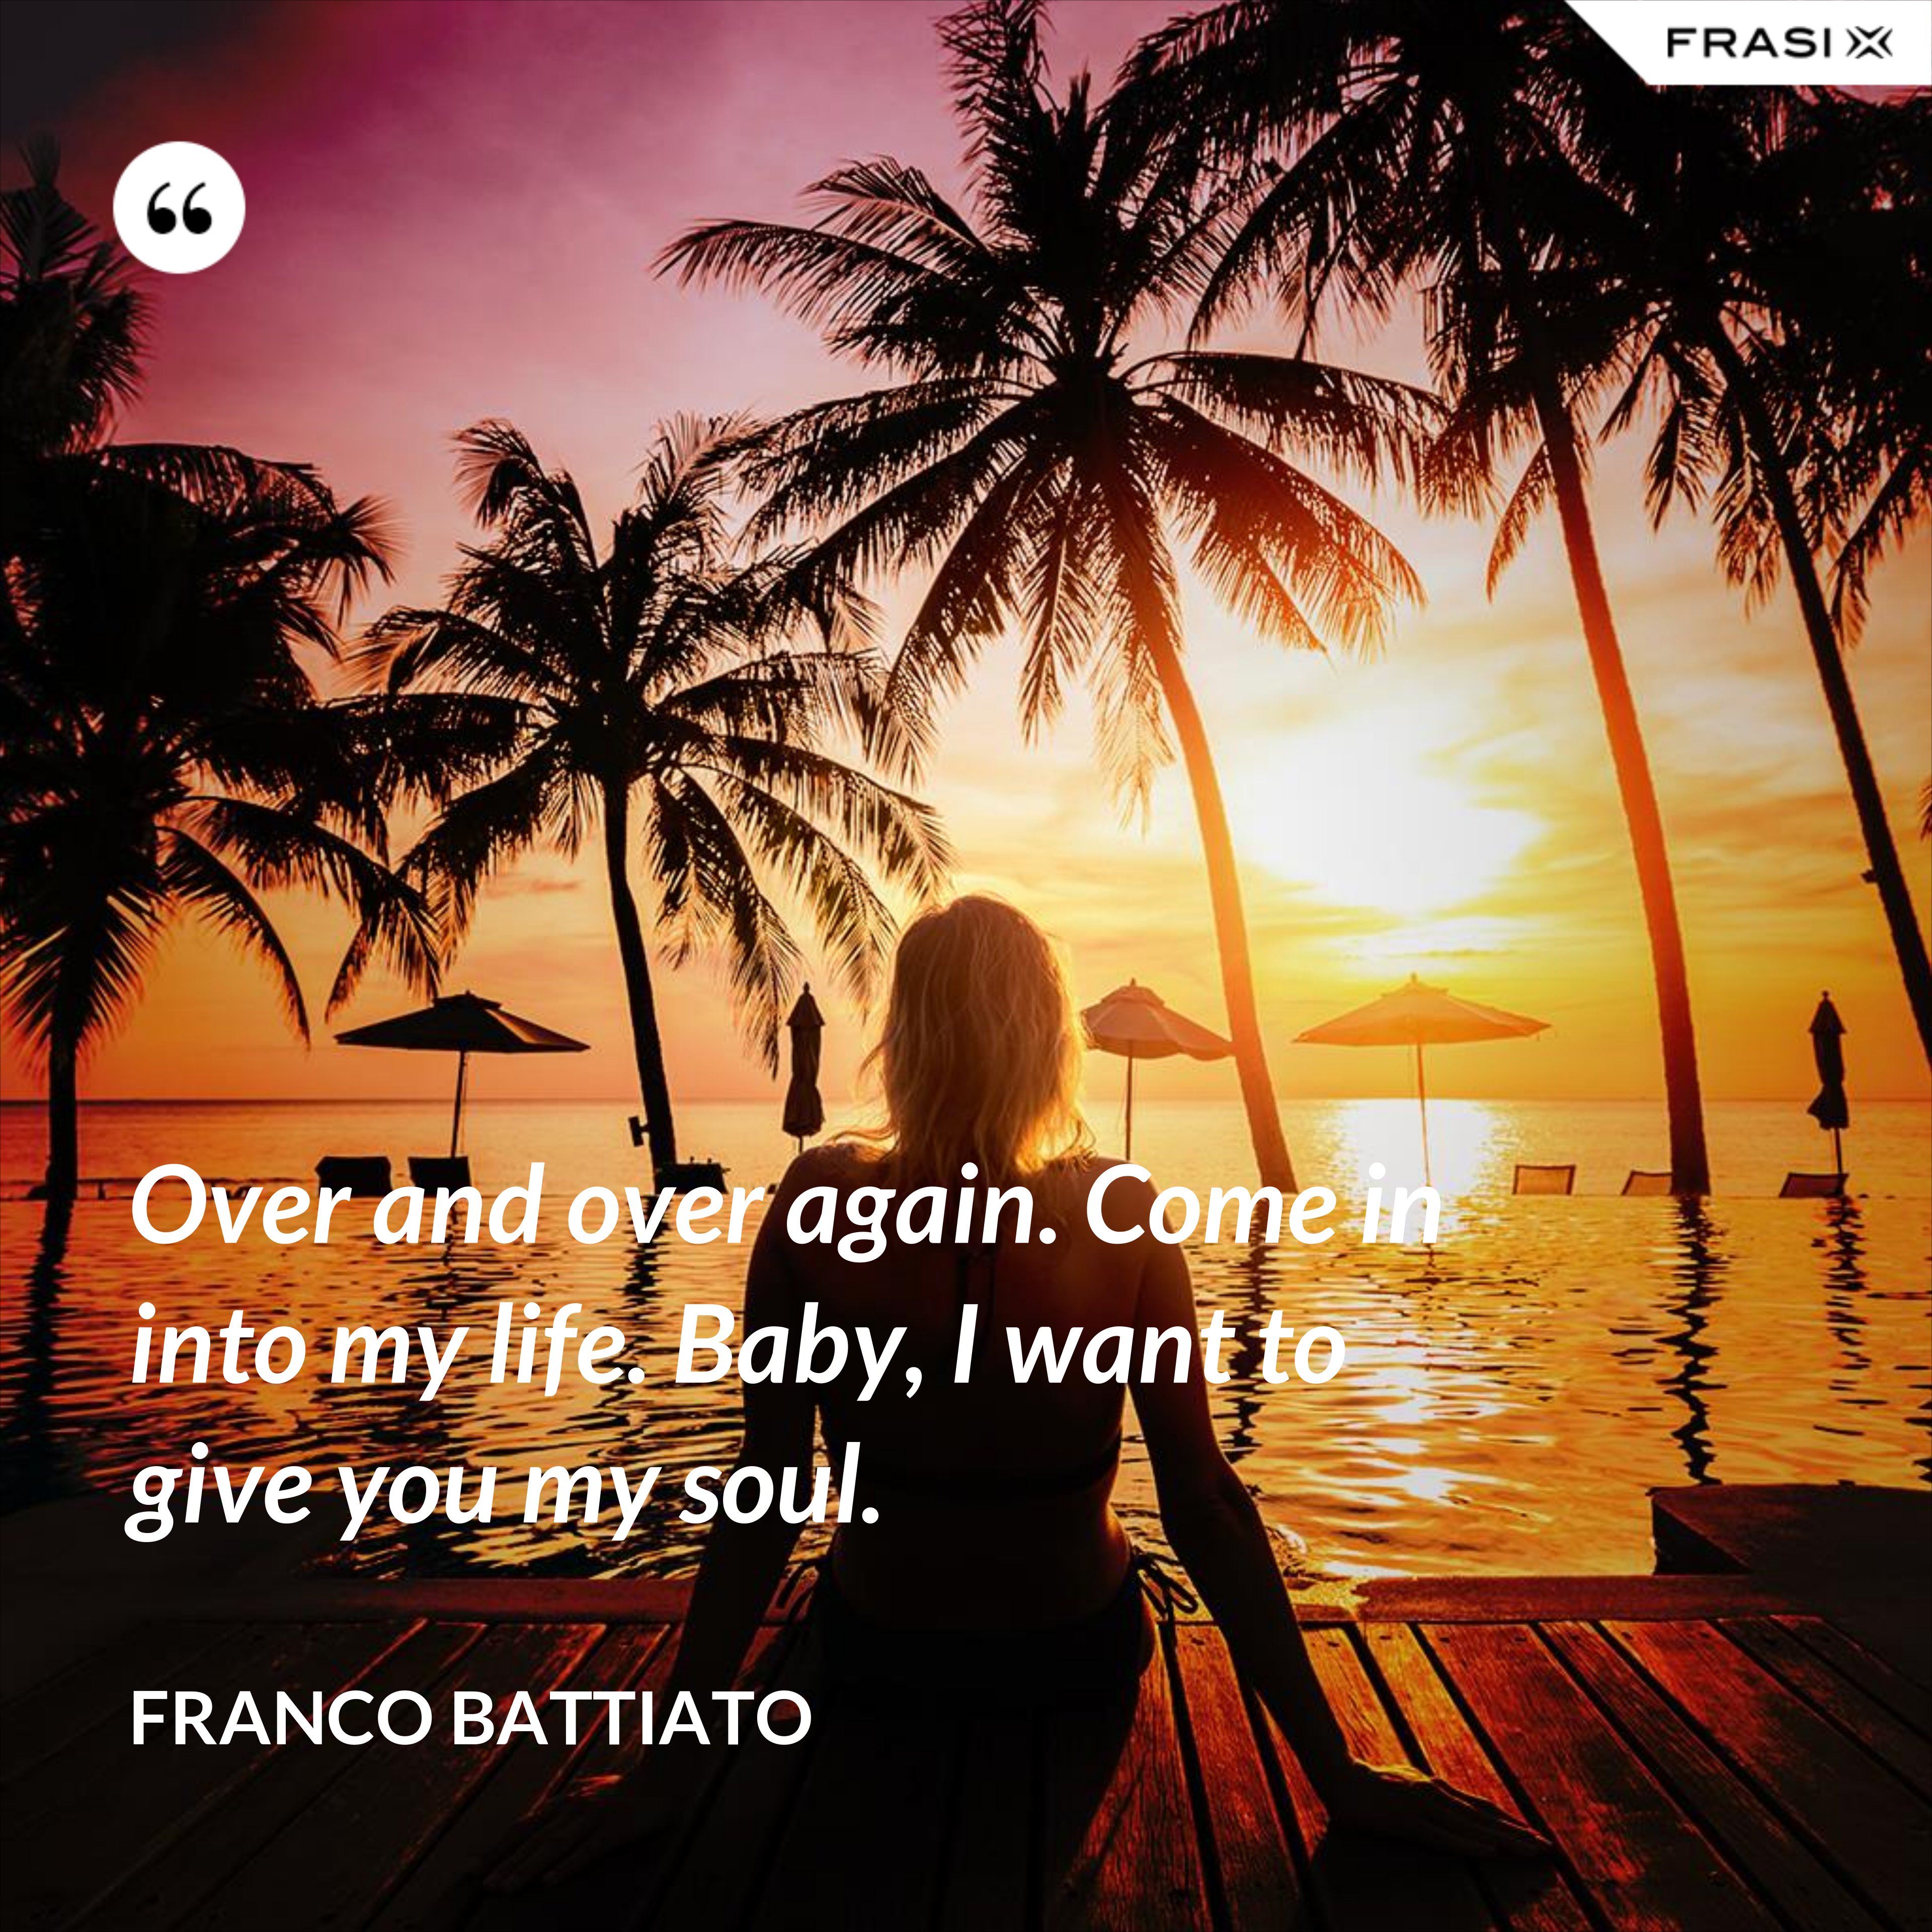 Over and over again. Come in into my life. Baby, I want to give you my soul. - Franco Battiato